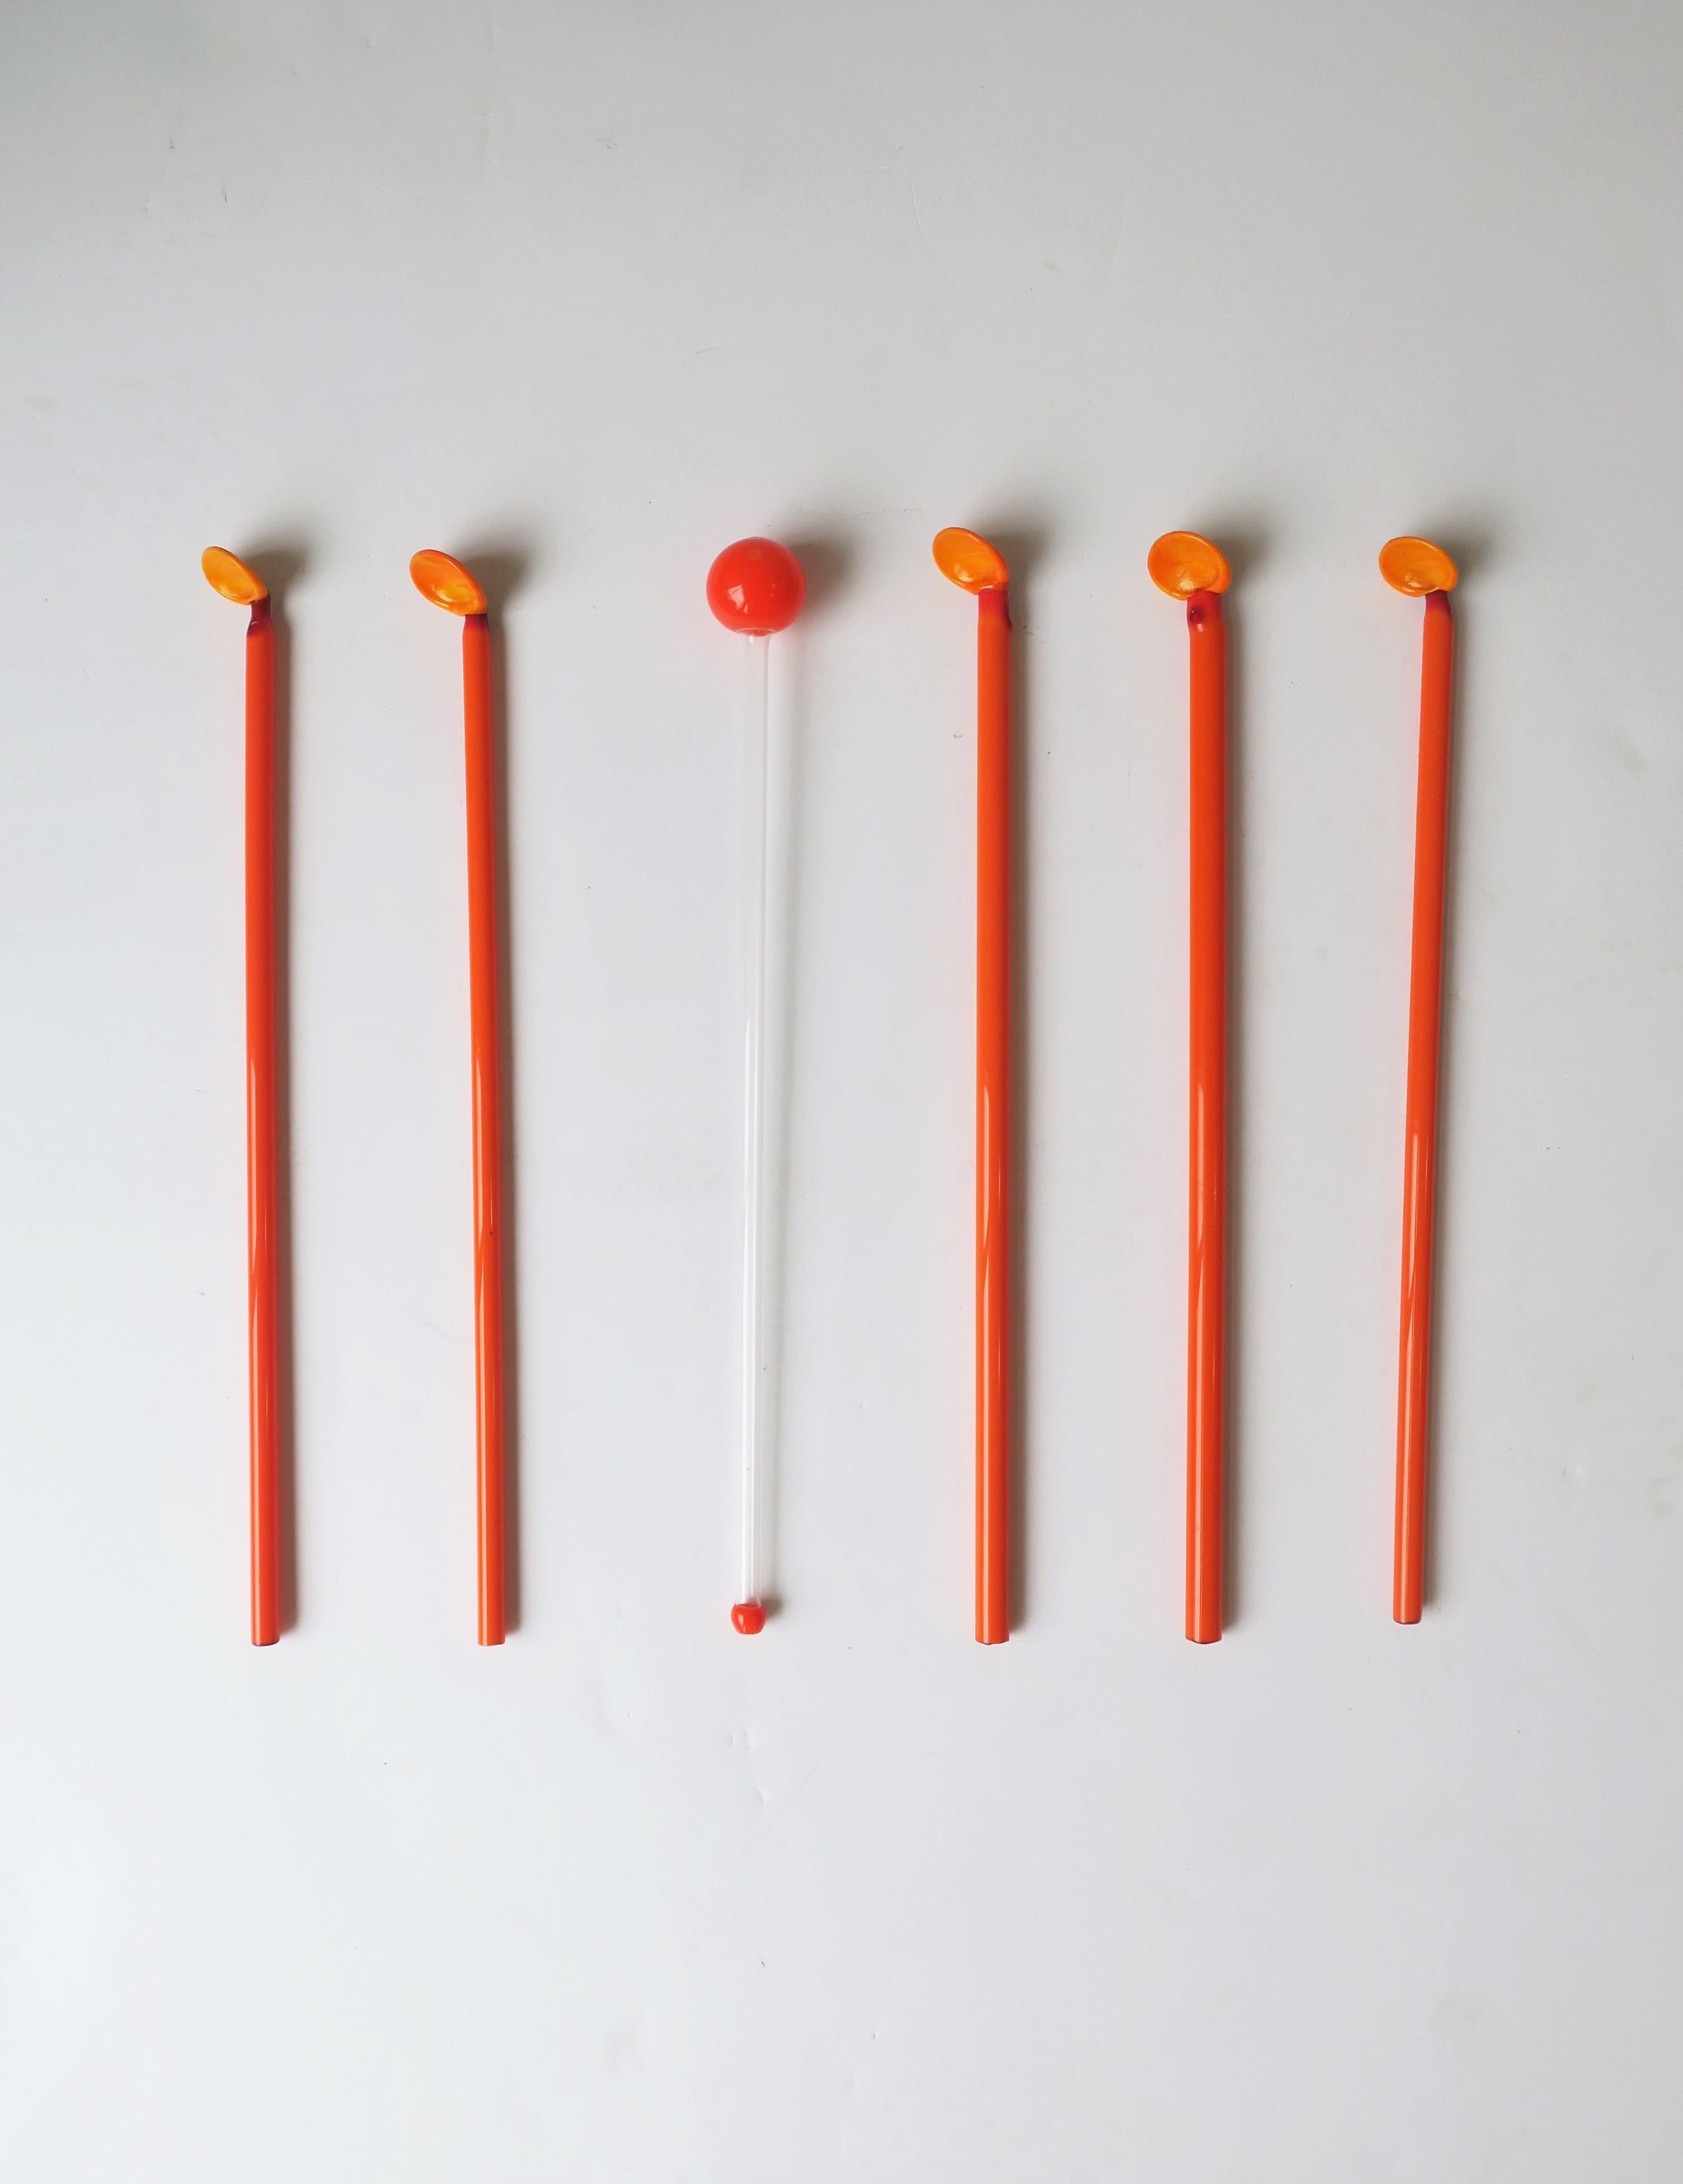 A beautiful set of six (6) vintage Italian barware orange art glass cocktail stirrers straw and spoon and one 'ball', circa mid-20th century, Italy. Beautiful for entertaining; bar, bar cart, yacht, etc. Each measure: 8